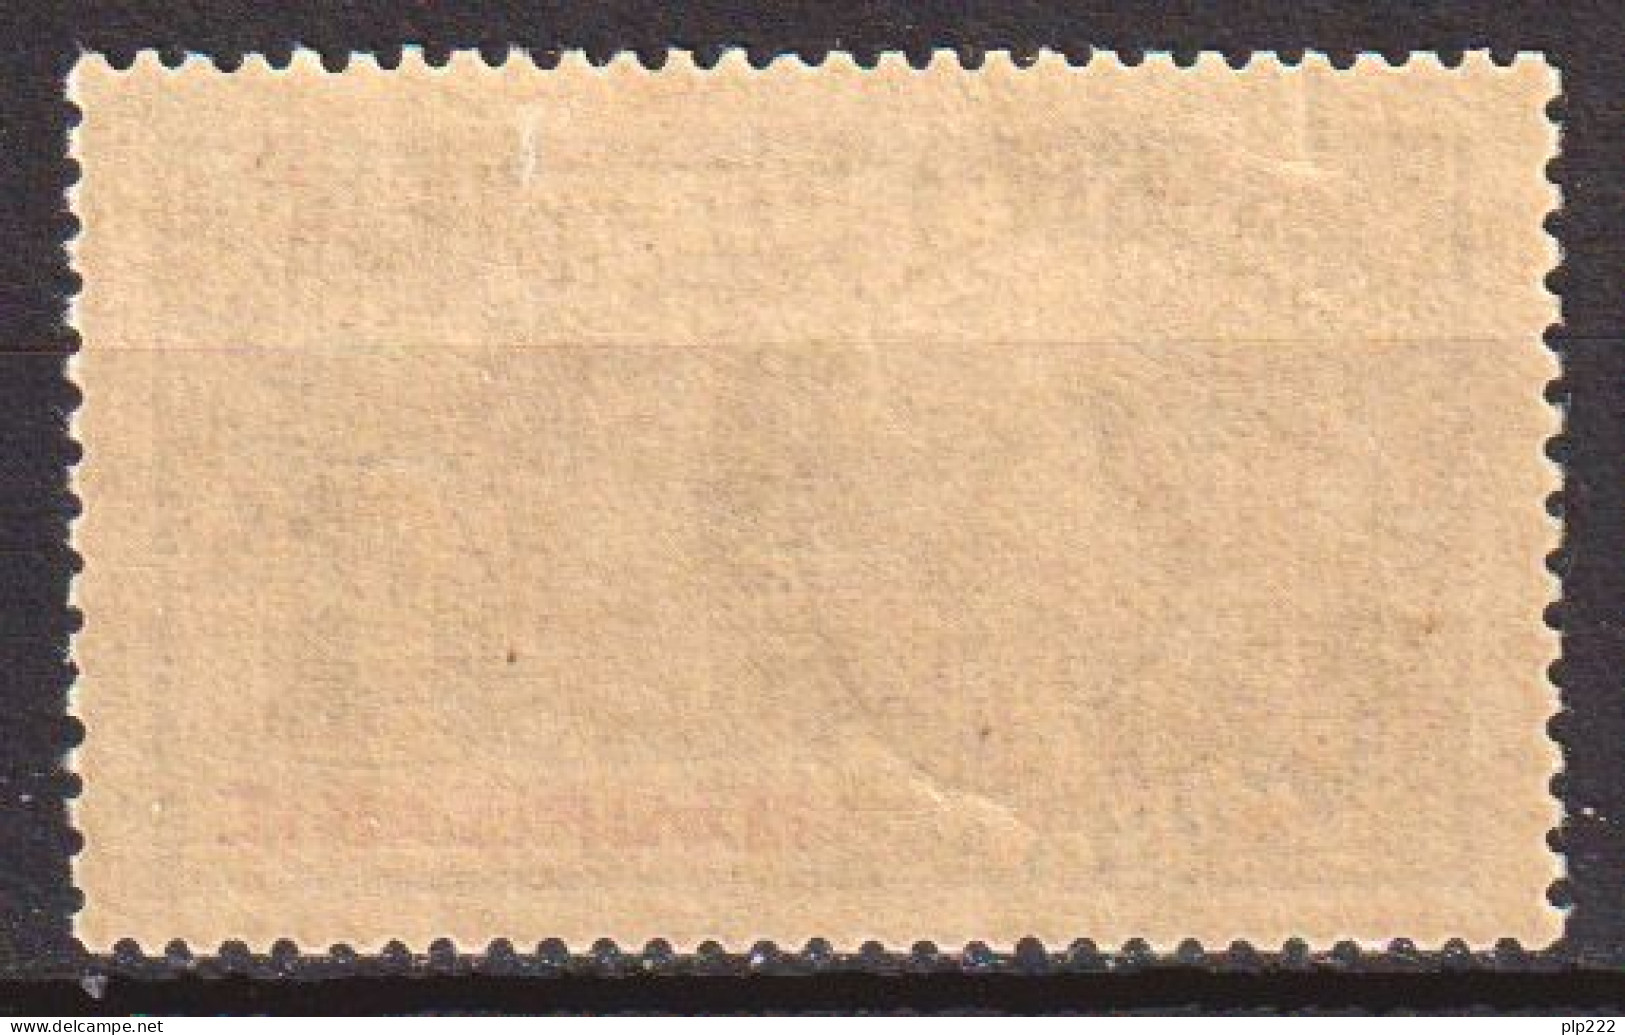 Mauritania 1906 Y.T.14 */MH VF/F - Unused Stamps